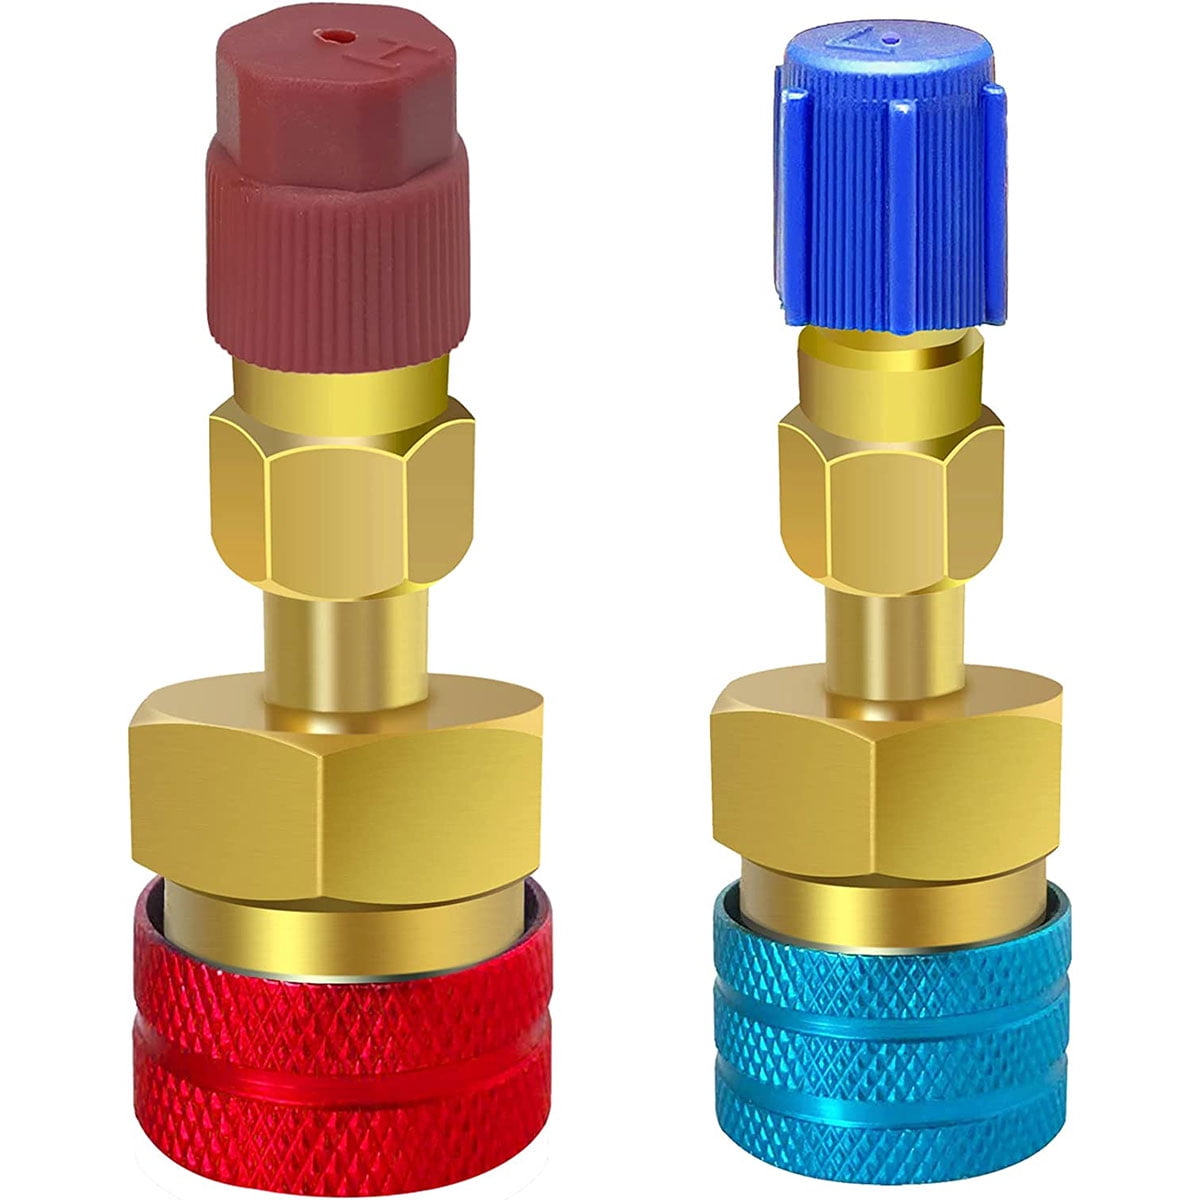 R1234yf To R134a Adapter Brass Connector Adapter Hose Fitting